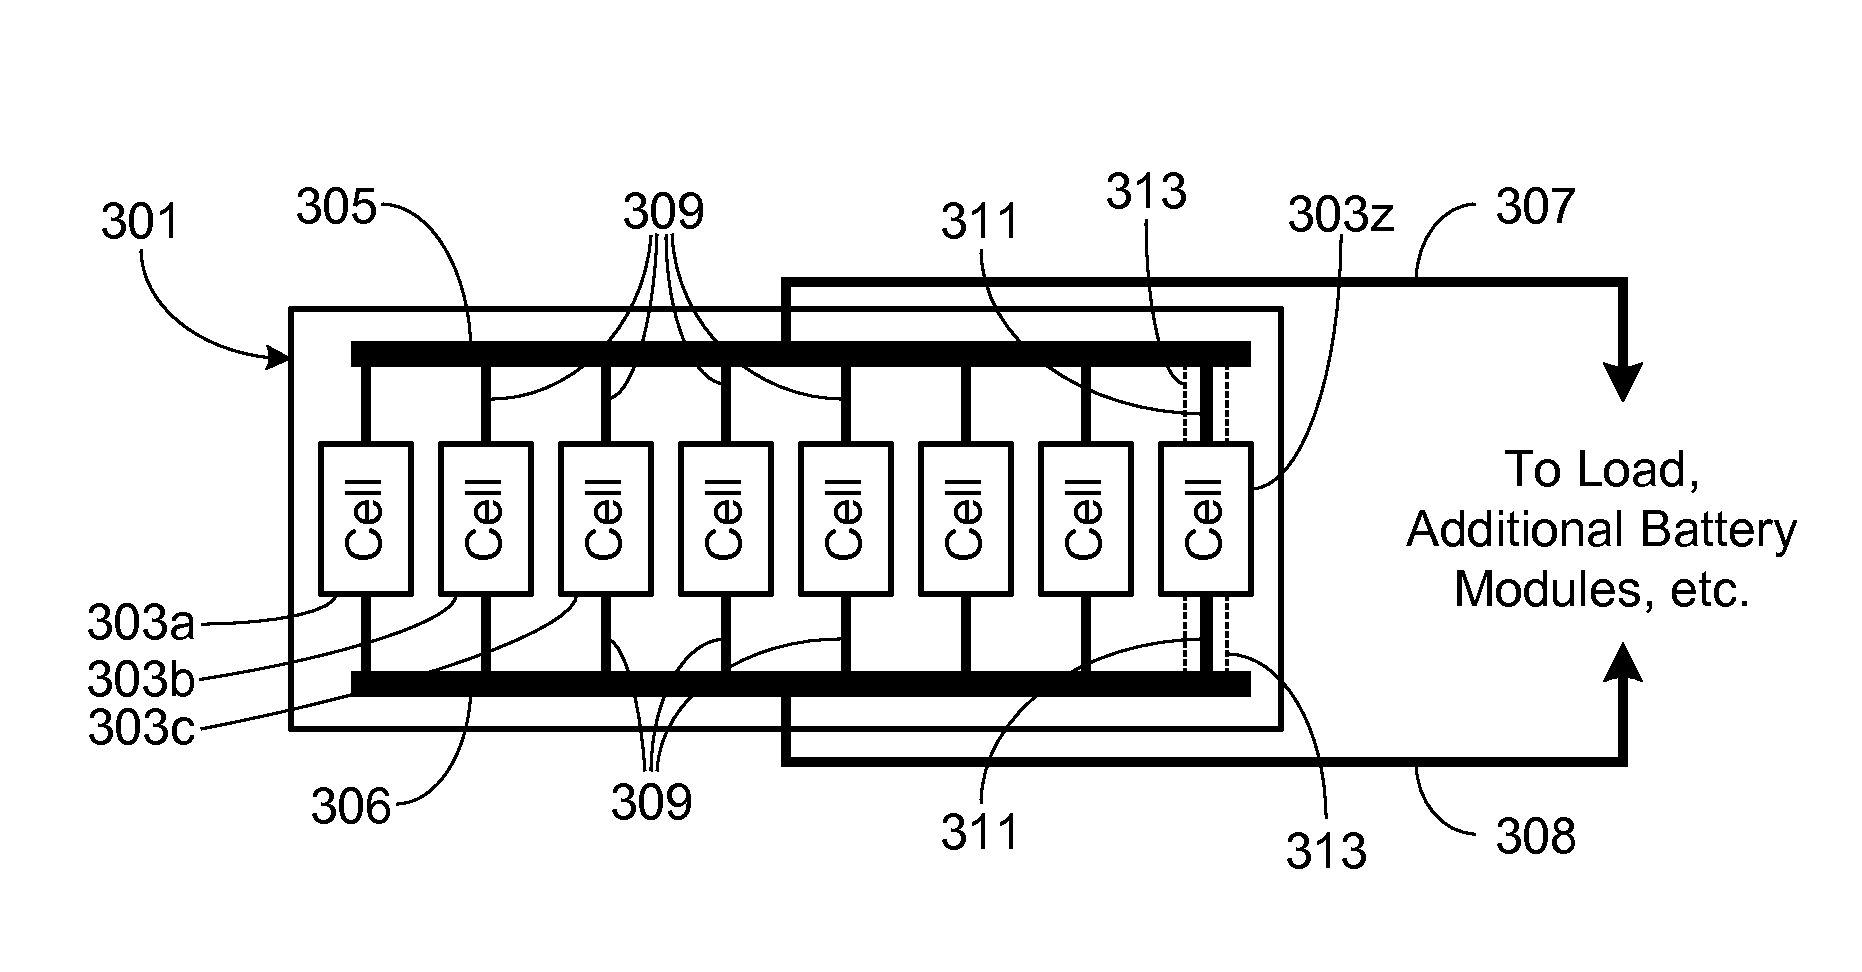 Method of controlled cell-level fusing within a battery pack